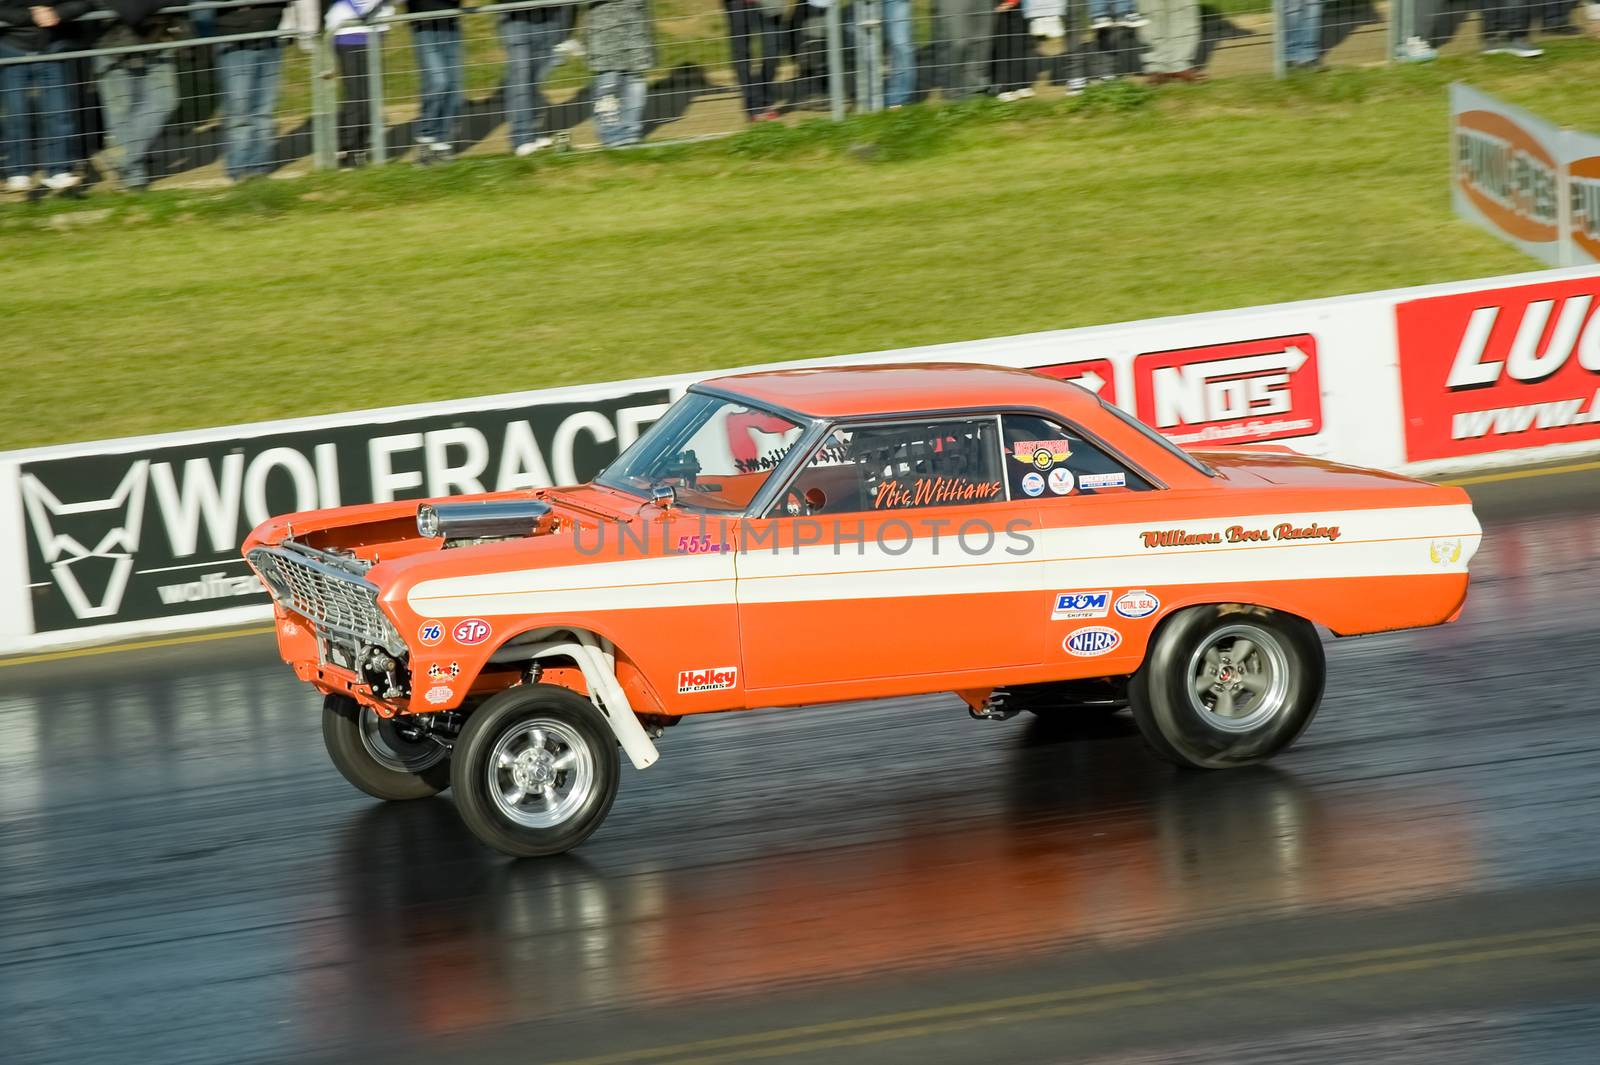 Santa Pod, UK - October 29, 2011: Pro modified Ford Falcon hotrod at the Flame and Thunder race event on at Santa Pod Raceway in Northamptonshire, UK